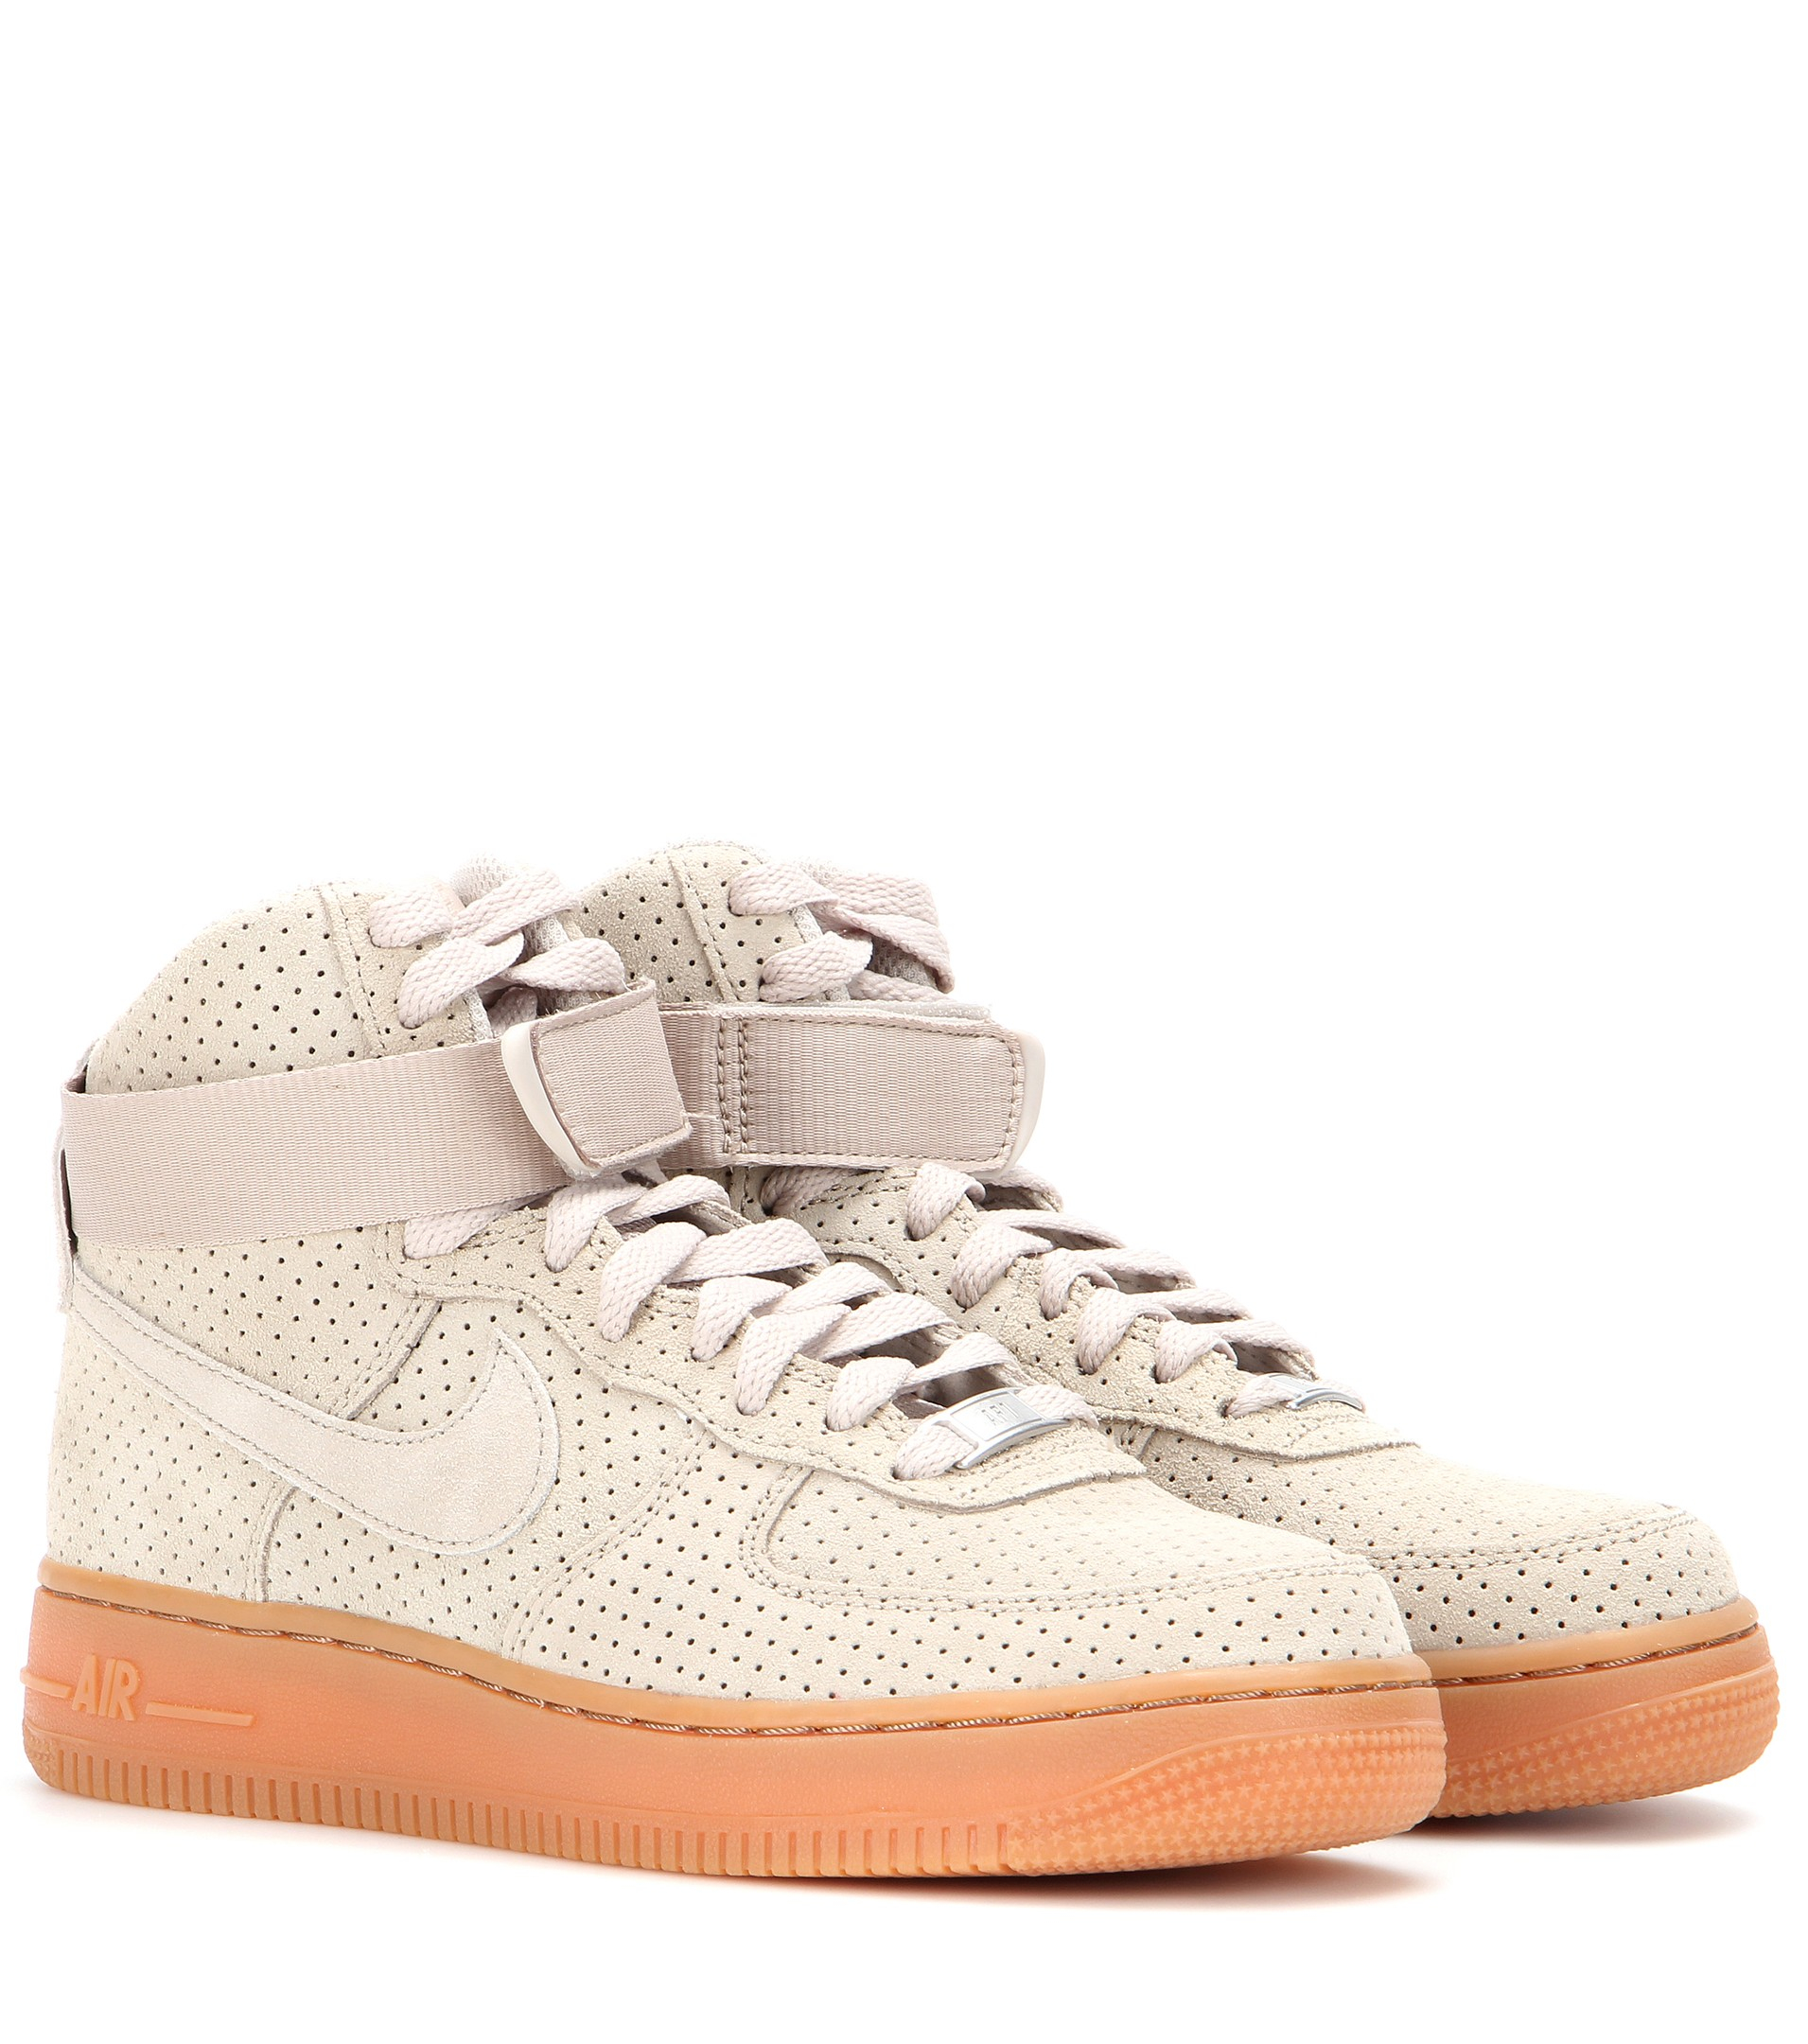 Lyst - Nike Air Force 1 Suede High-top Sneakers in Natural